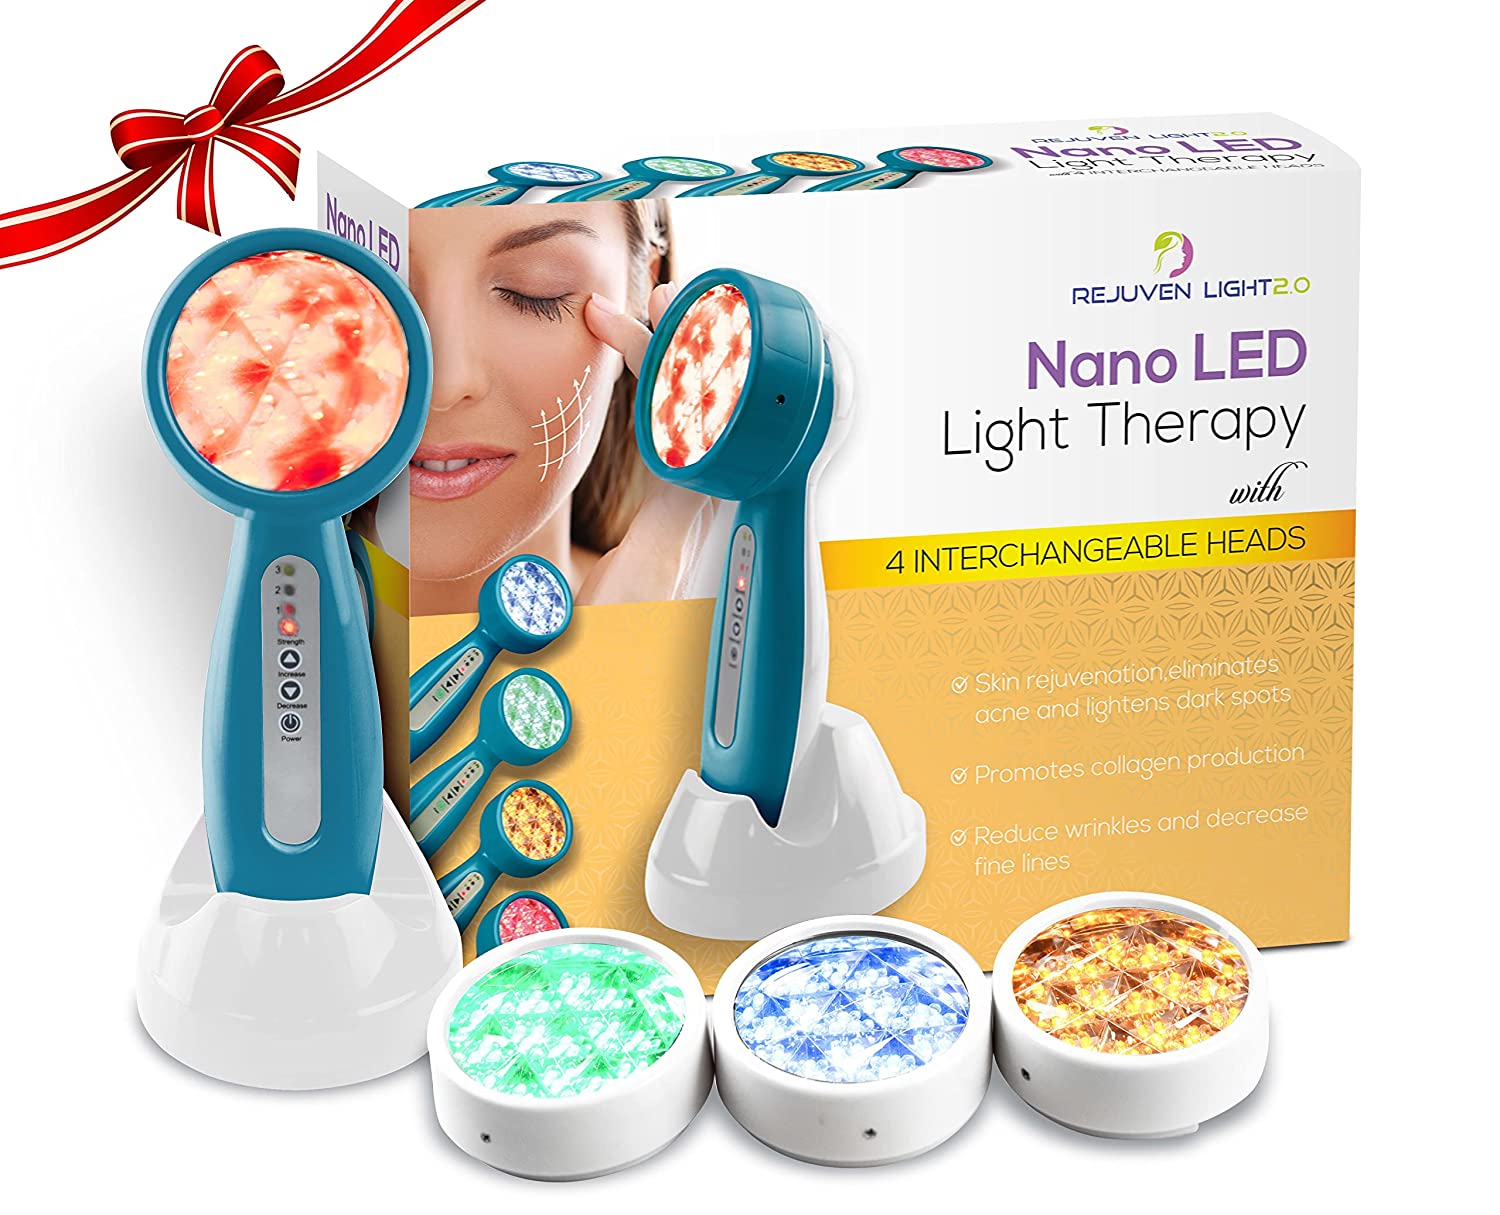 Rejuven Light LED Light Therapy with 4-In-1 Interchangeable Red, Blue, Yellow, Green Light Heads Anti-Aging Device